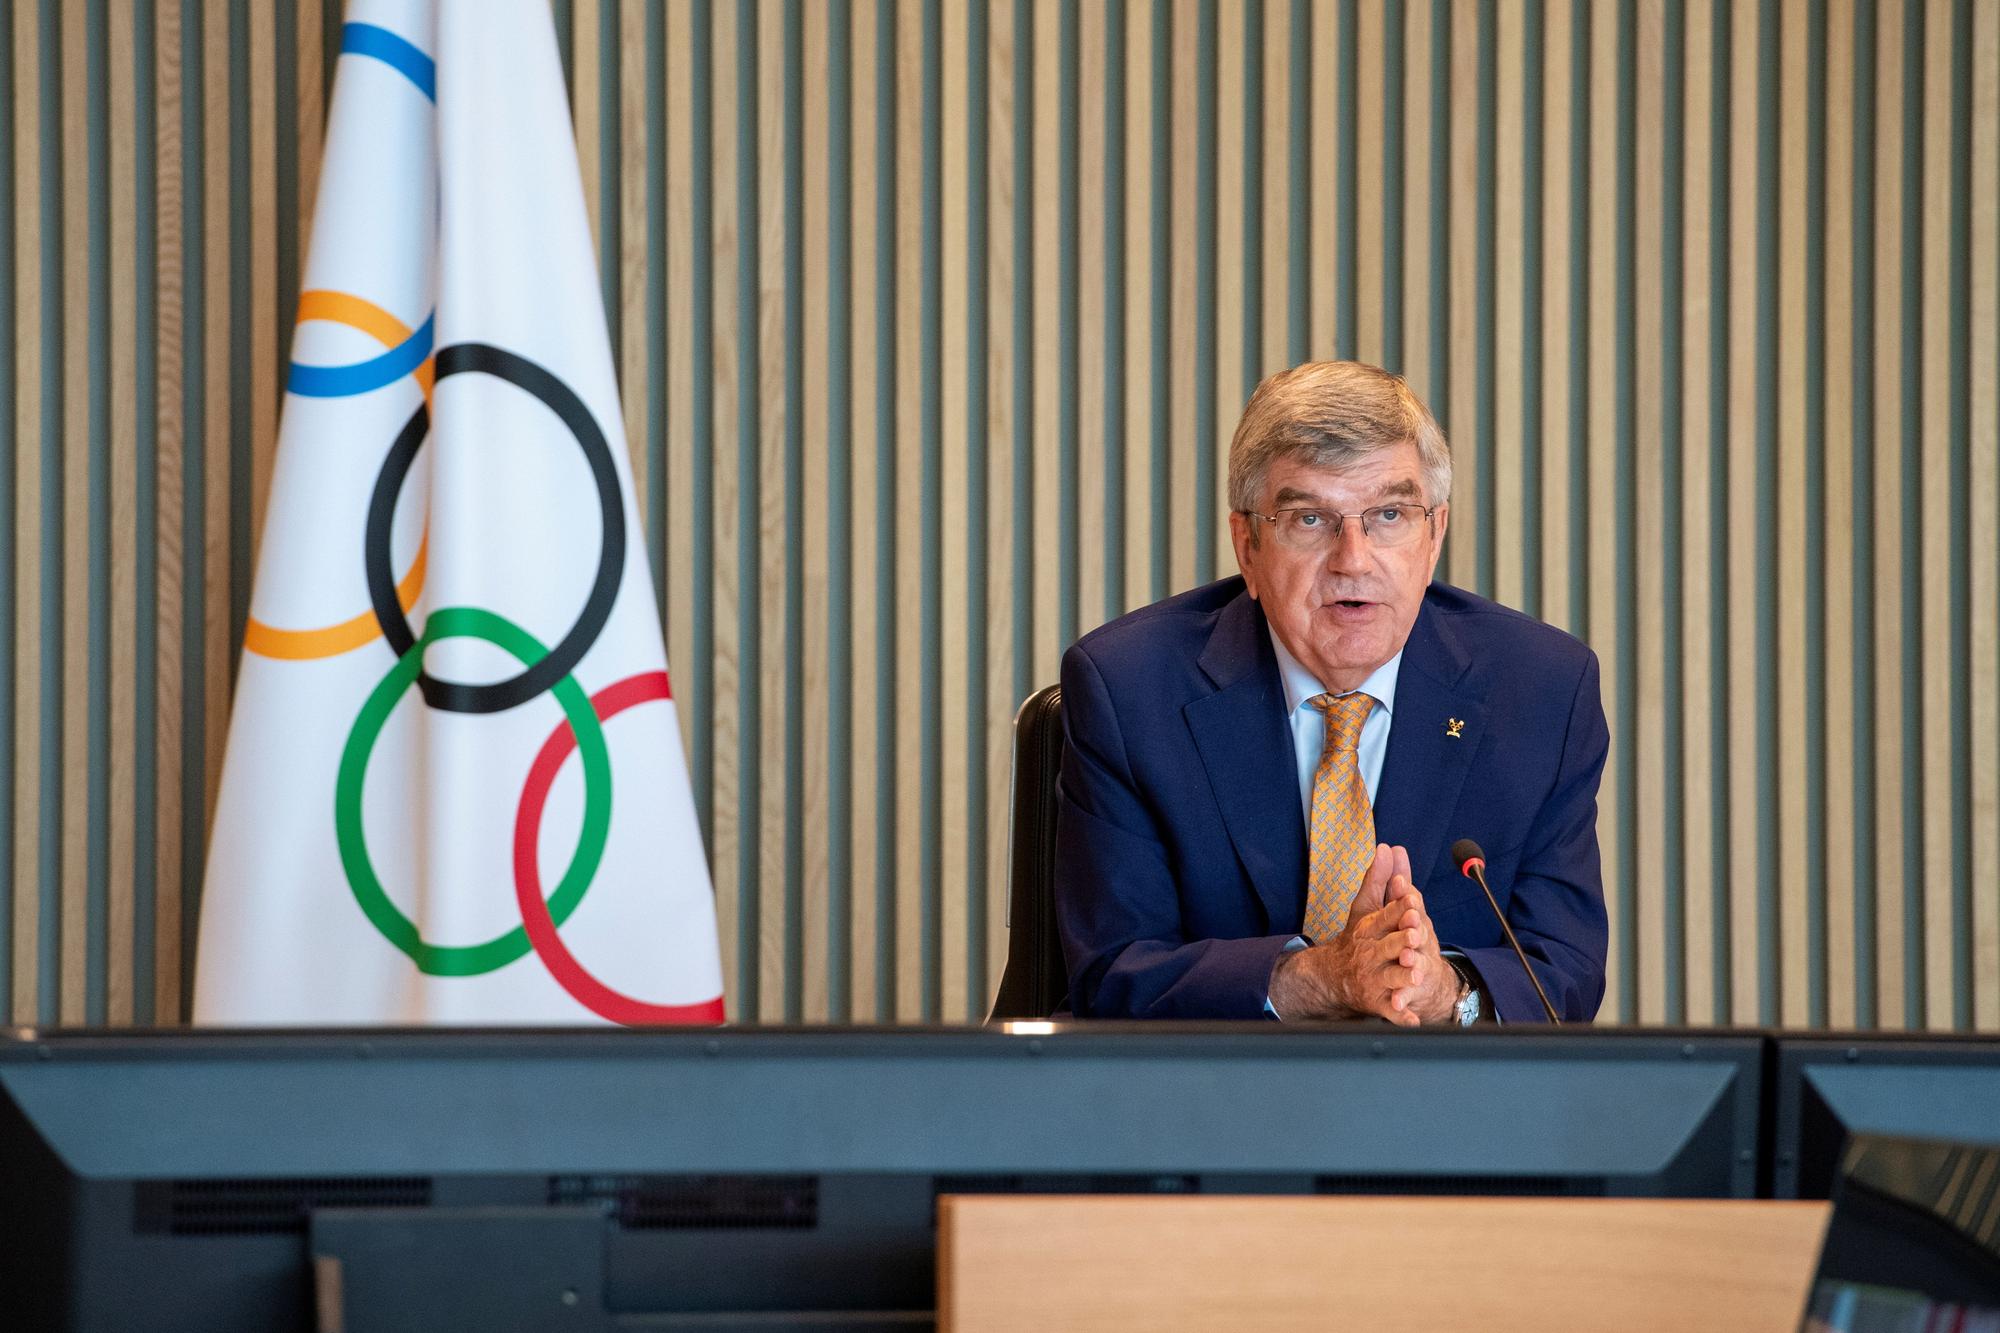 Thomas Bach during a meeting of the IOC executive committee.